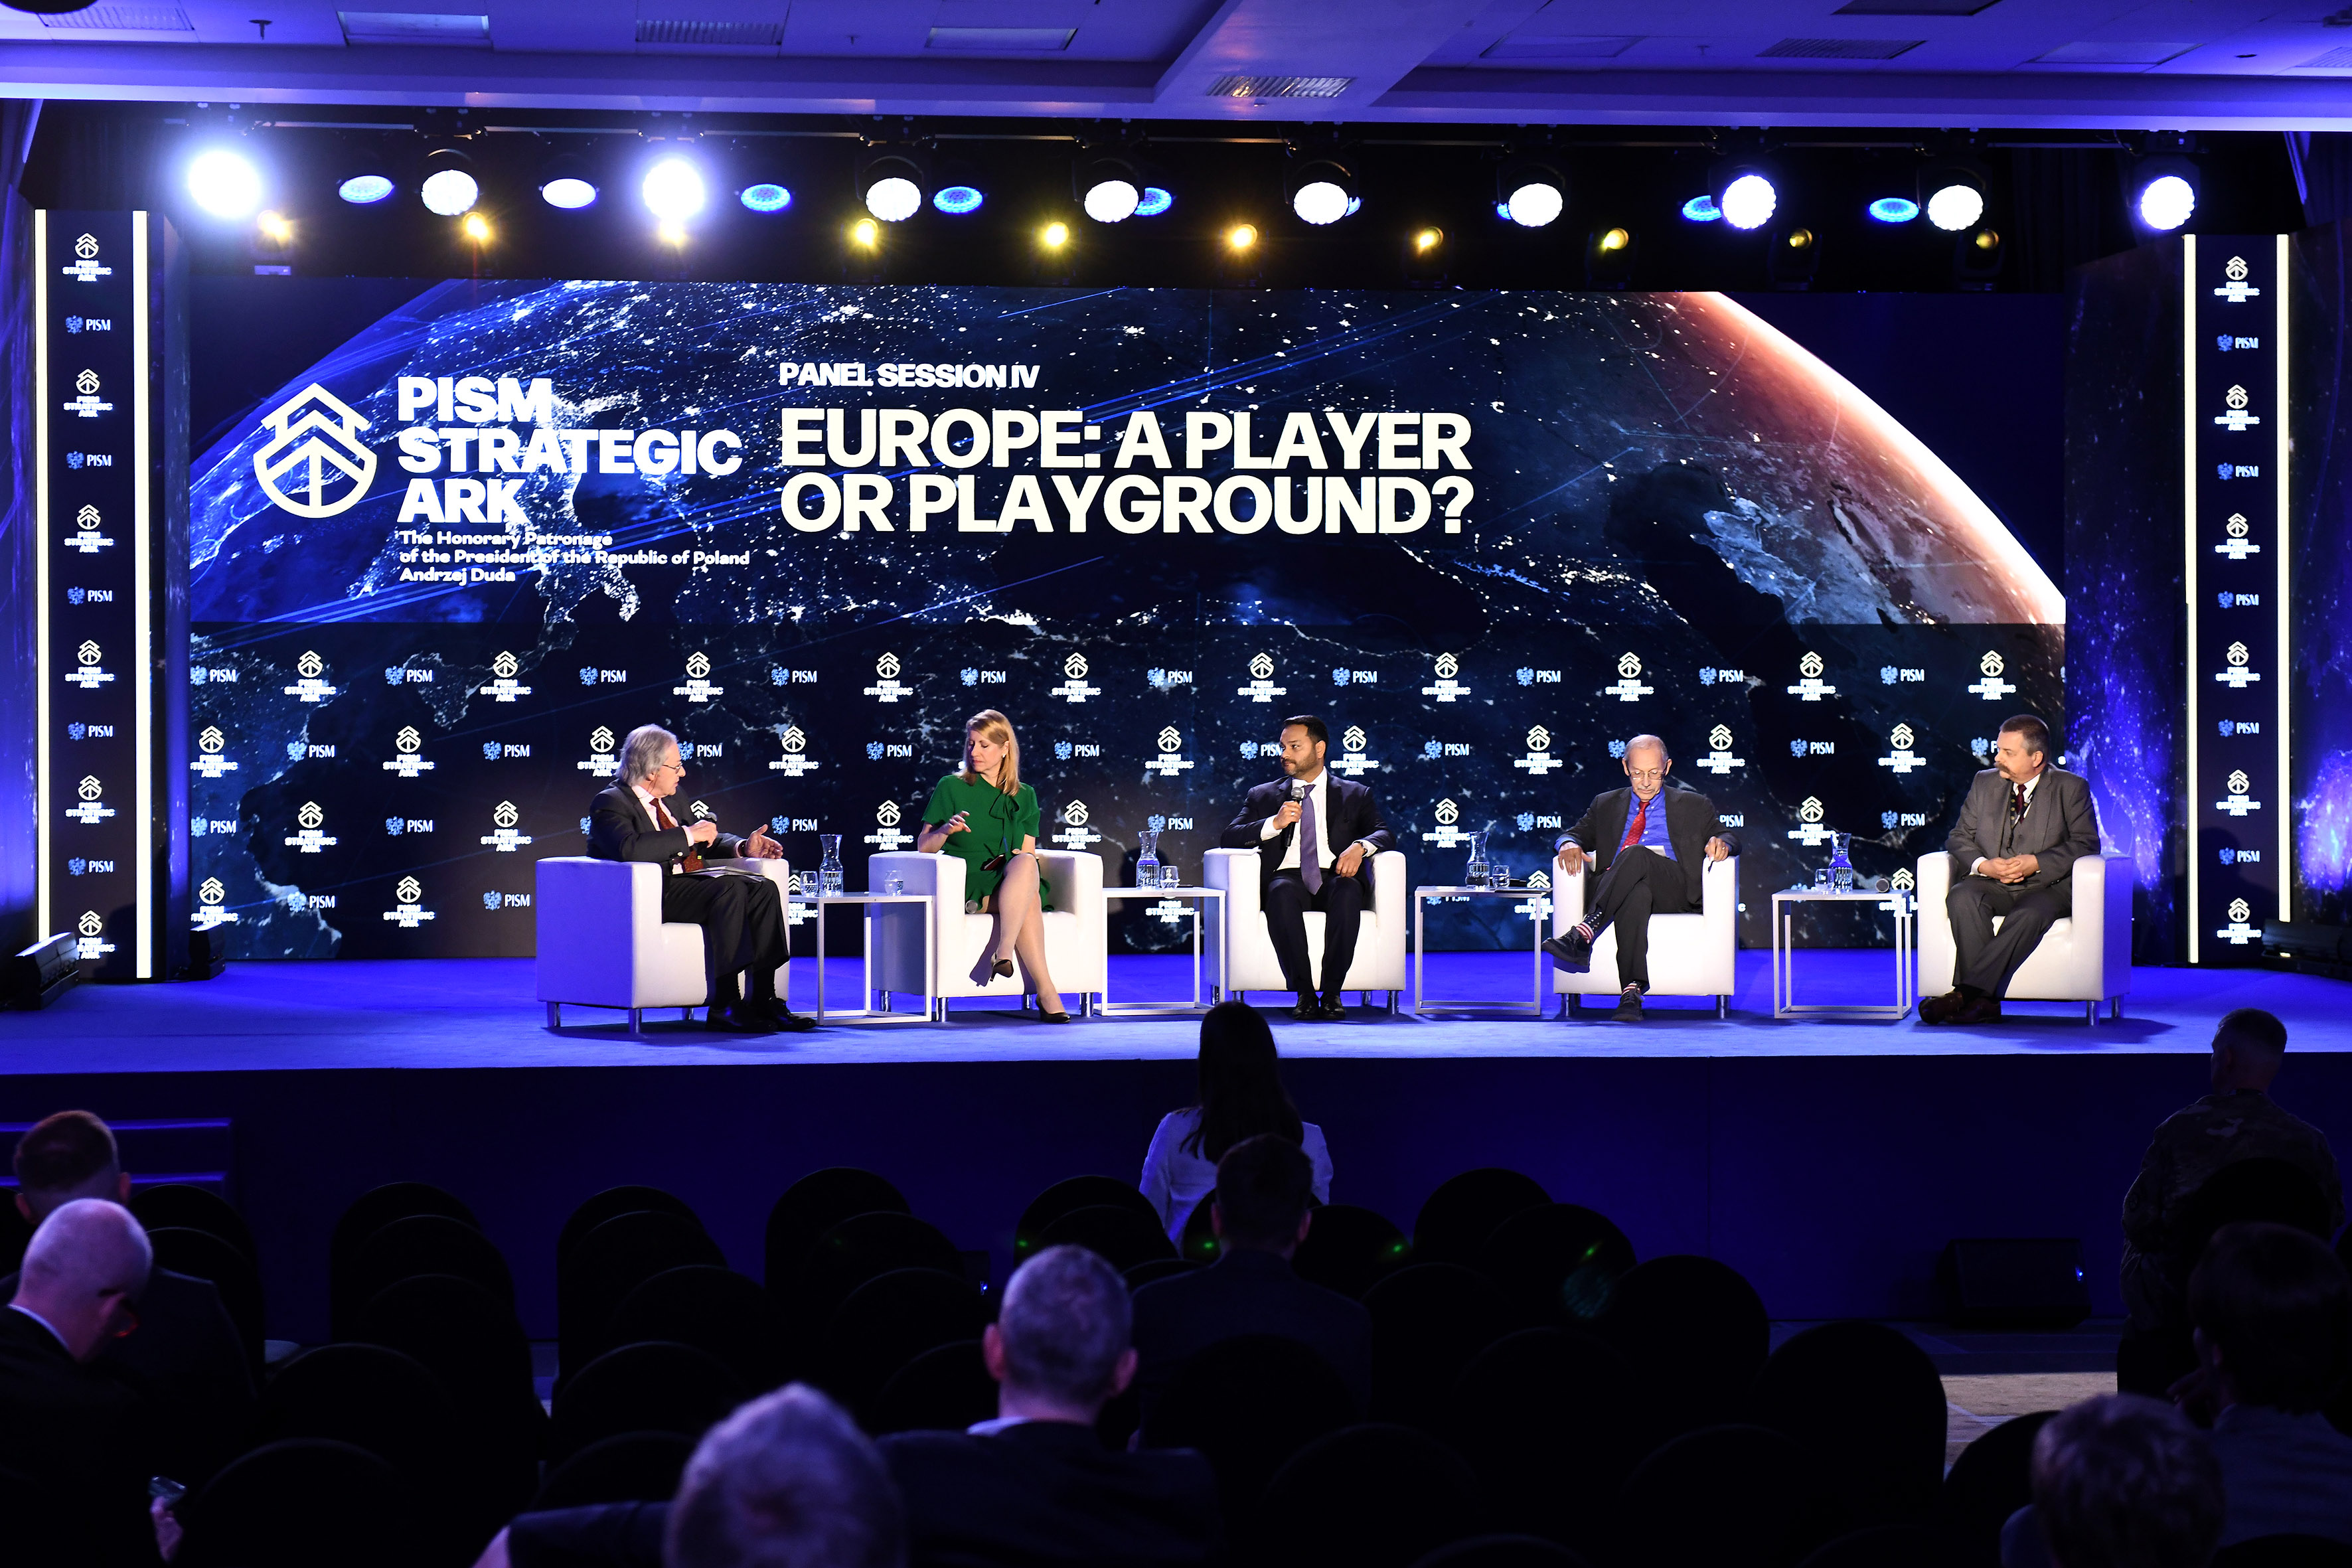 Panel Session IV - Europe: A Player or Playground?